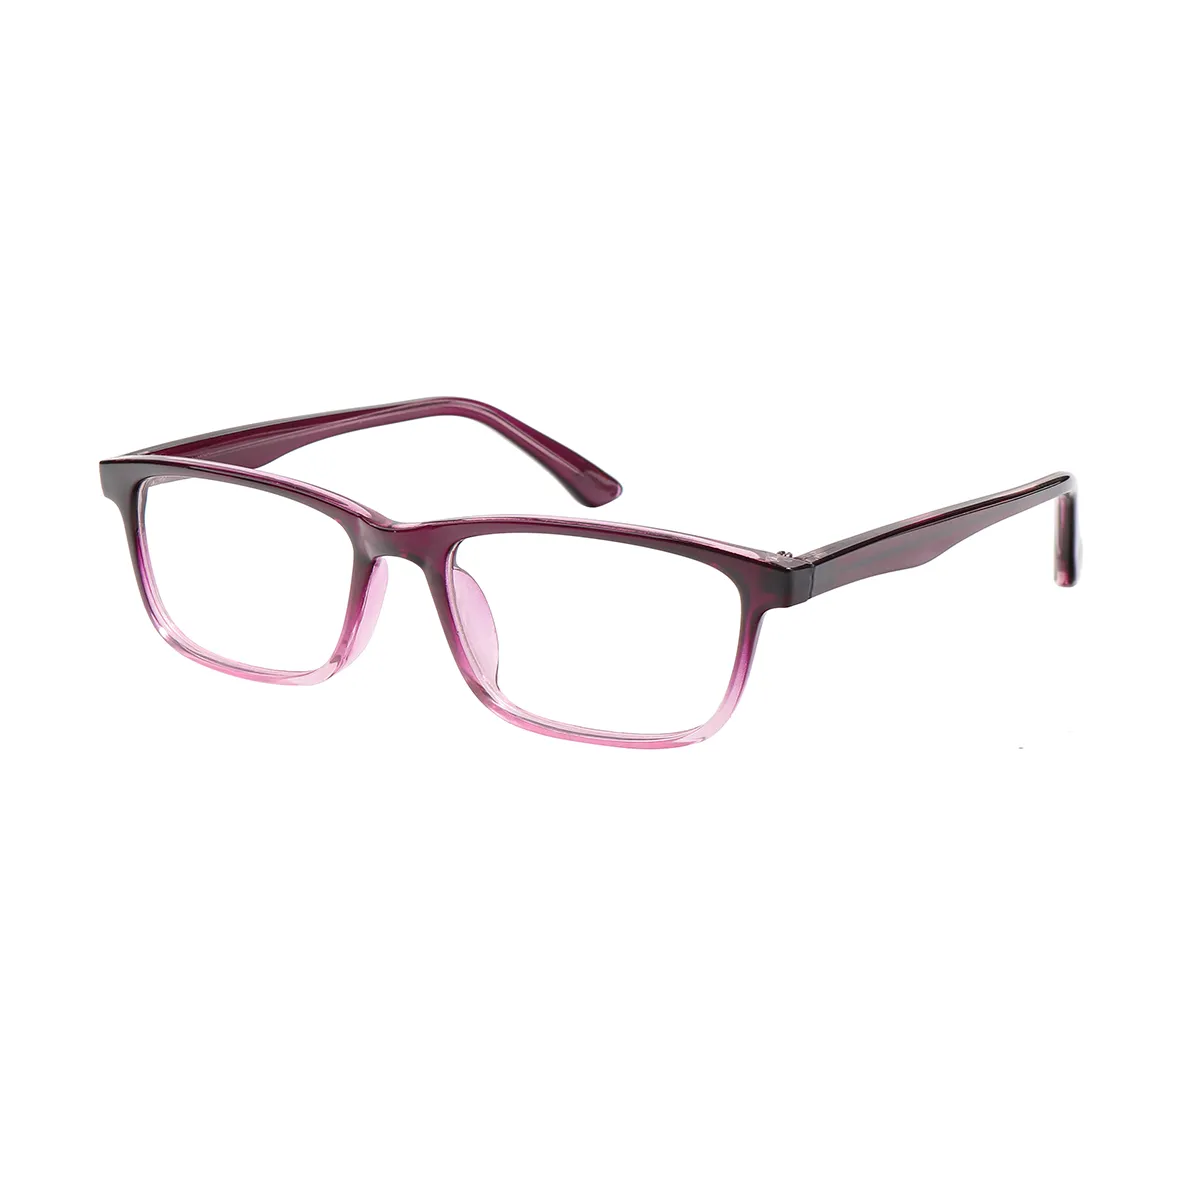 Aggy - Rectangle Purple Glasses for Women - EFE